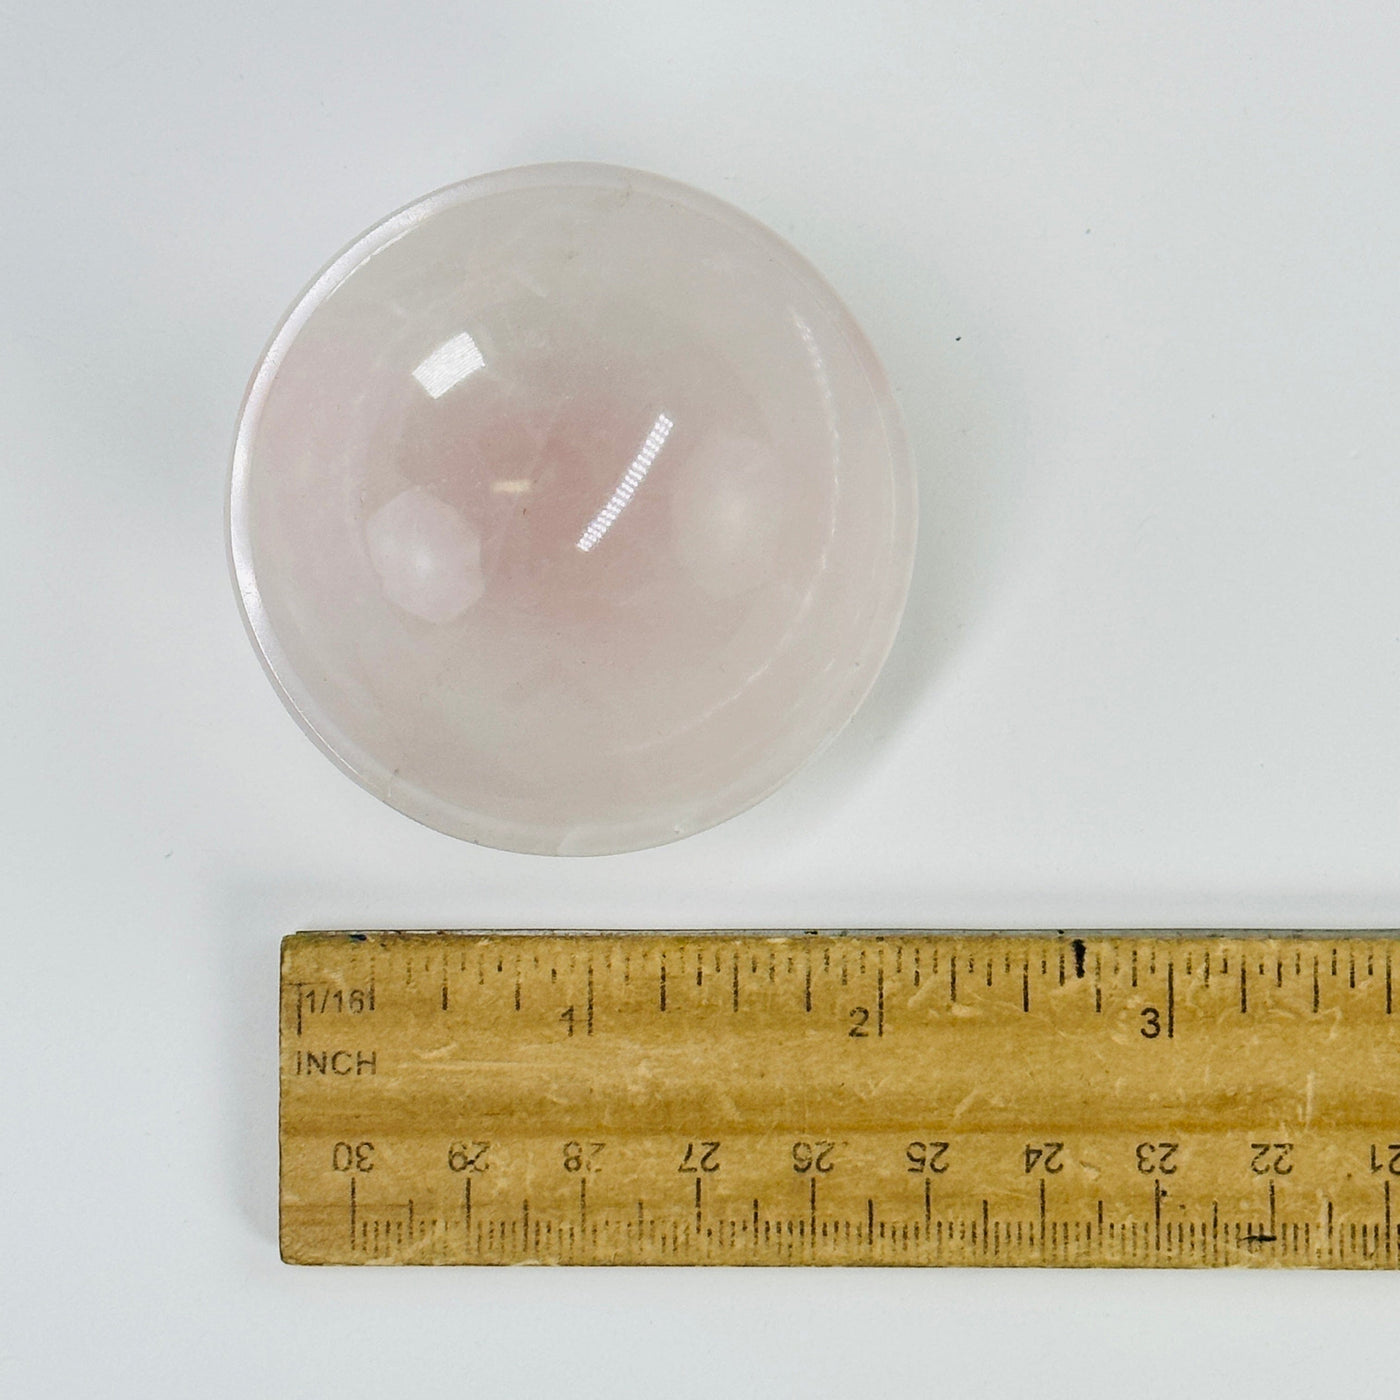 mini rose quartz bowl next to a ruler for size reference